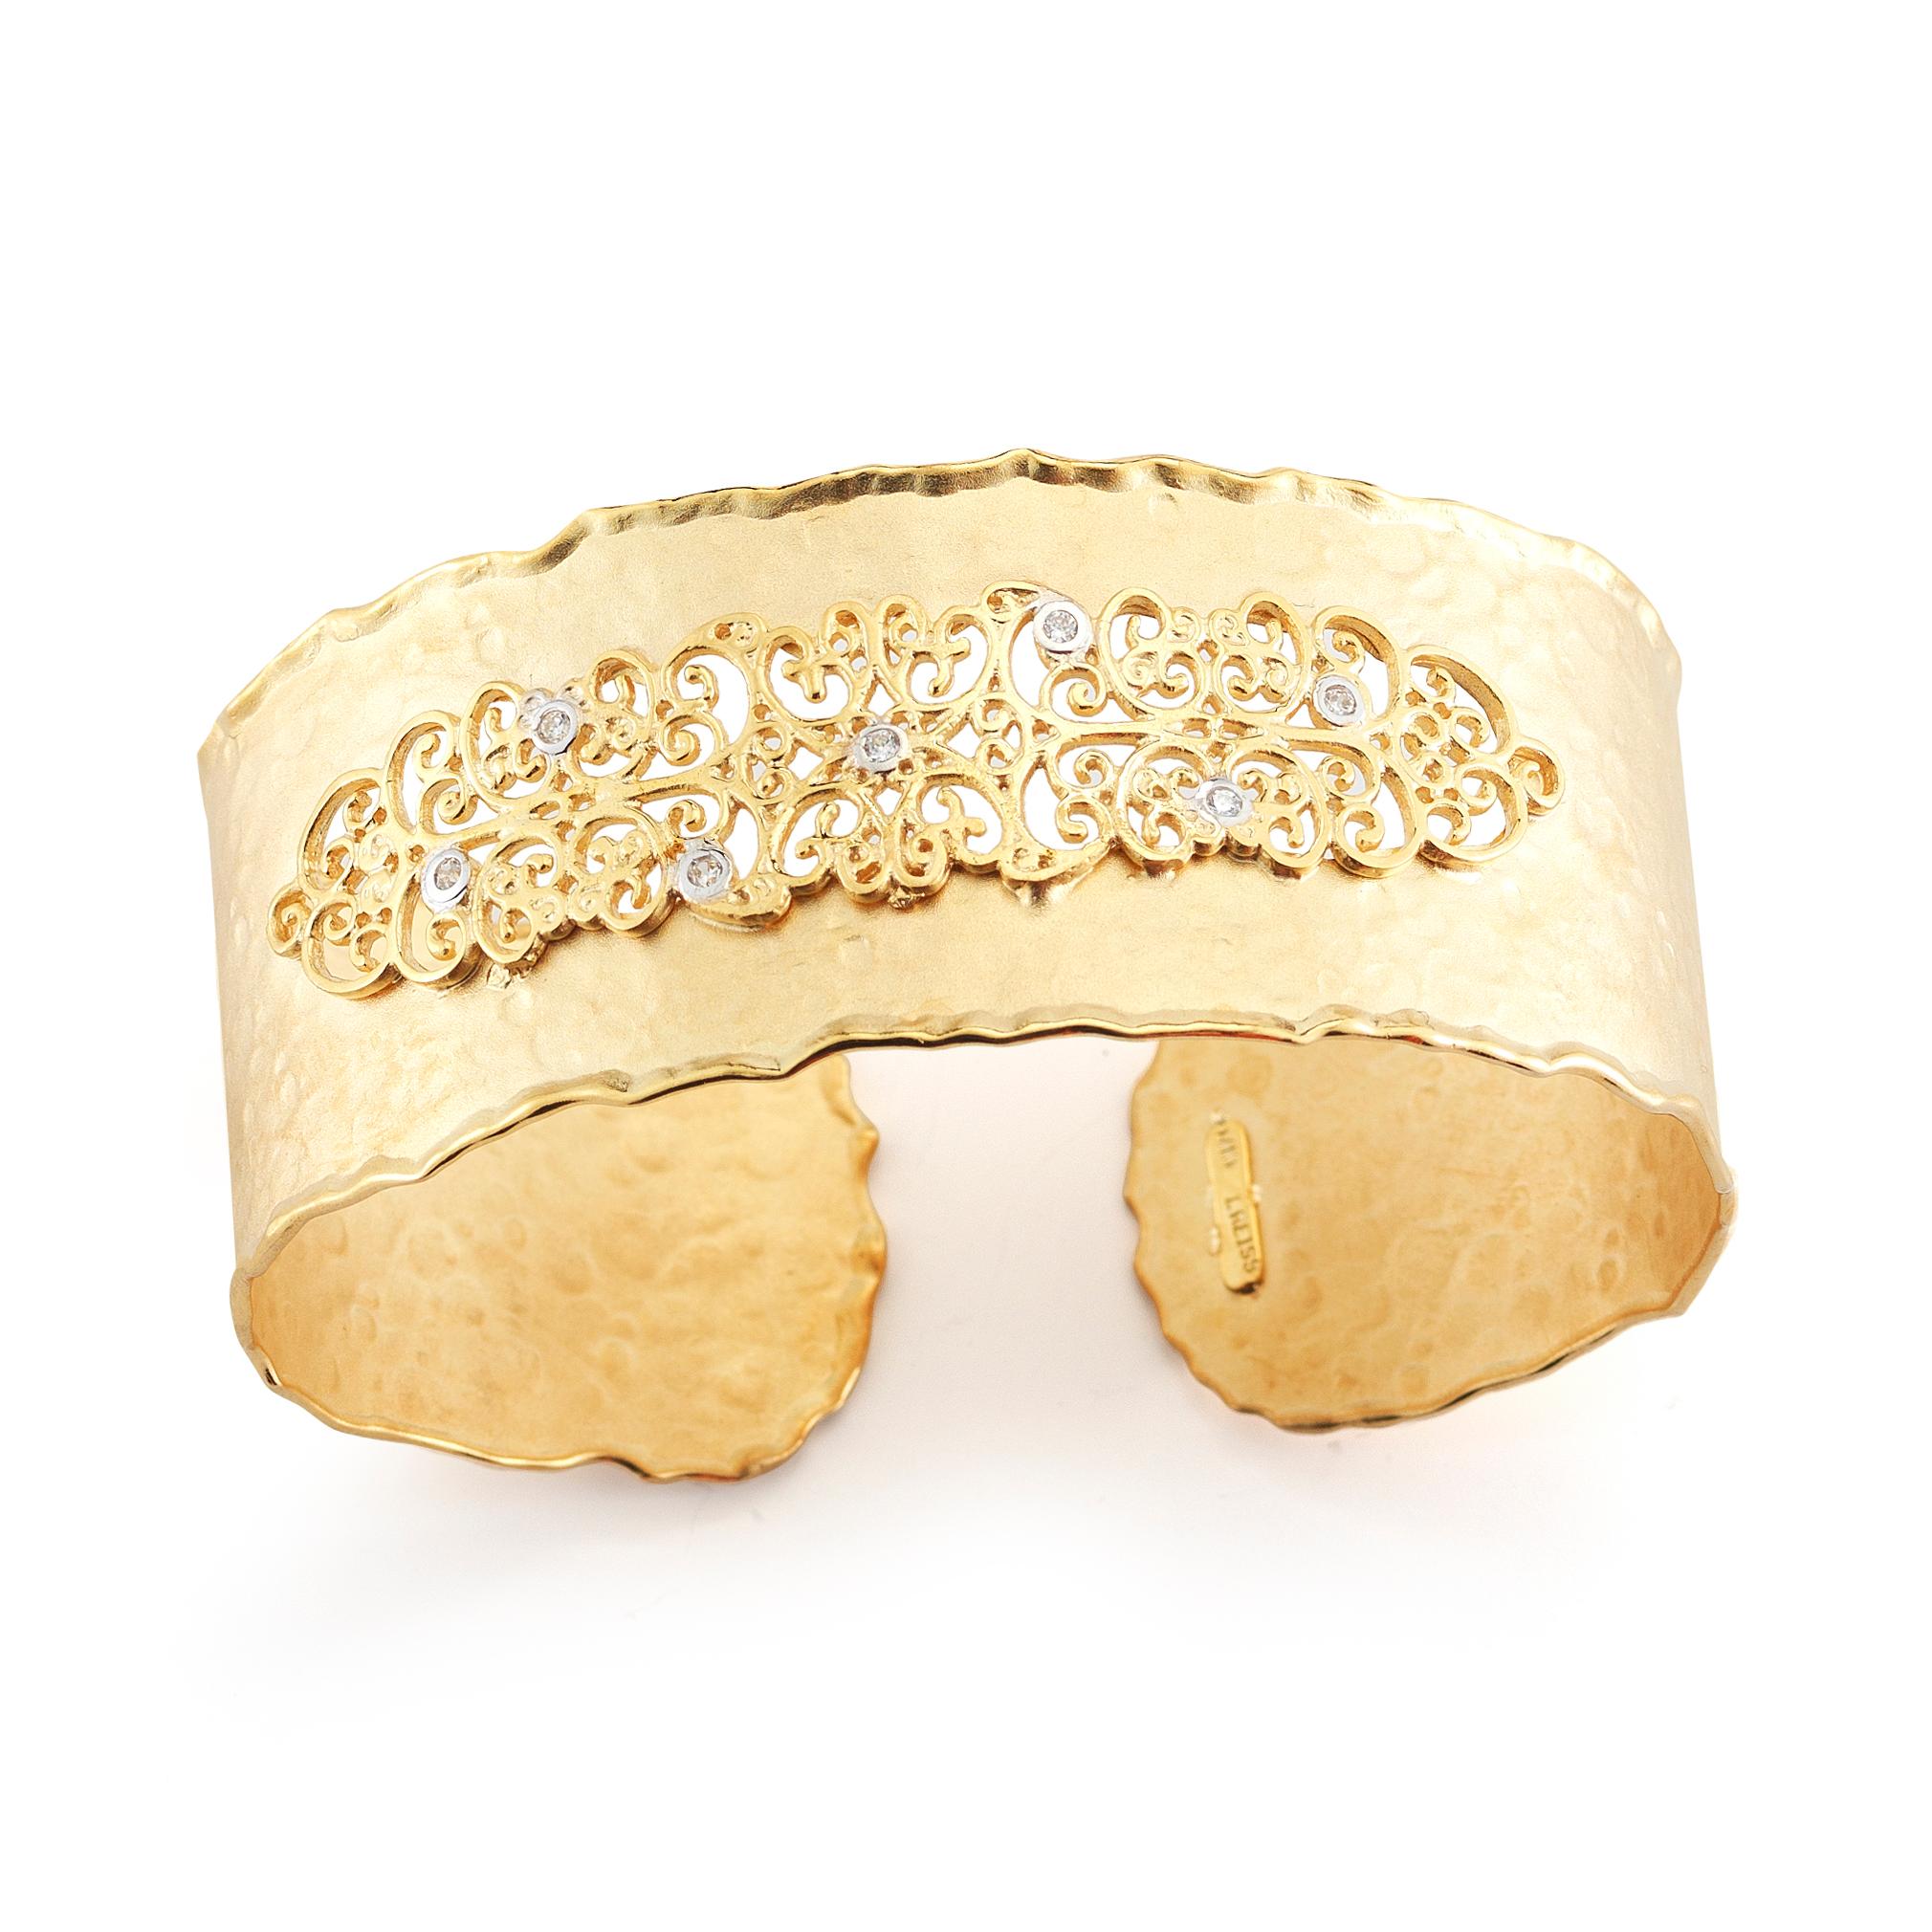 14 Karat Yellow Gold Hand-Crafted Matte And Hammer-Finish Filigree Cuff Bracelet, Accented With 0.14 Carats Of Bezel Set Diamonds.
